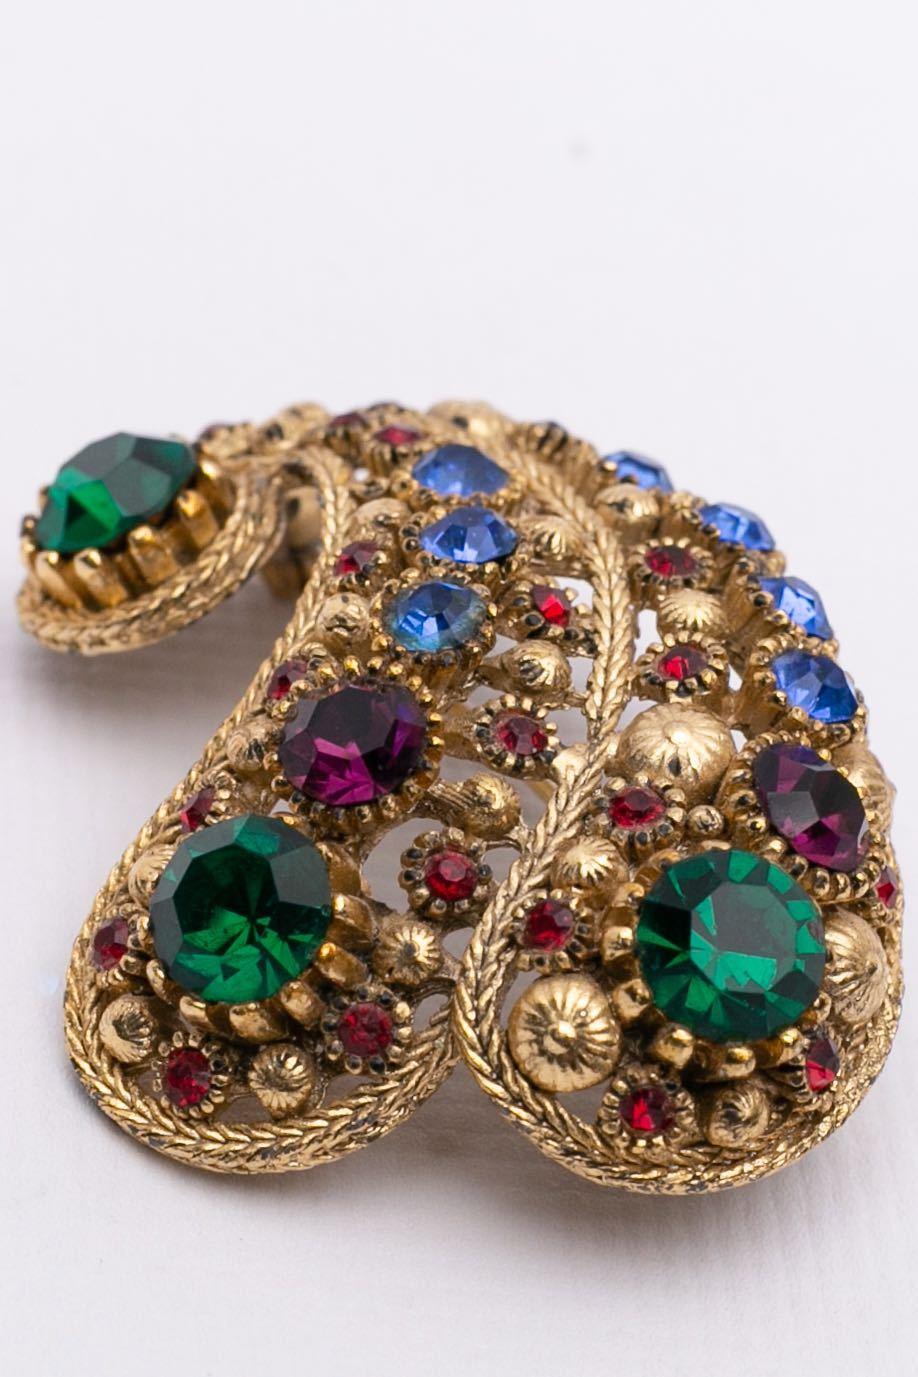 Women's Nina Ricci Gilted Metal Brooch with Rhinestones For Sale